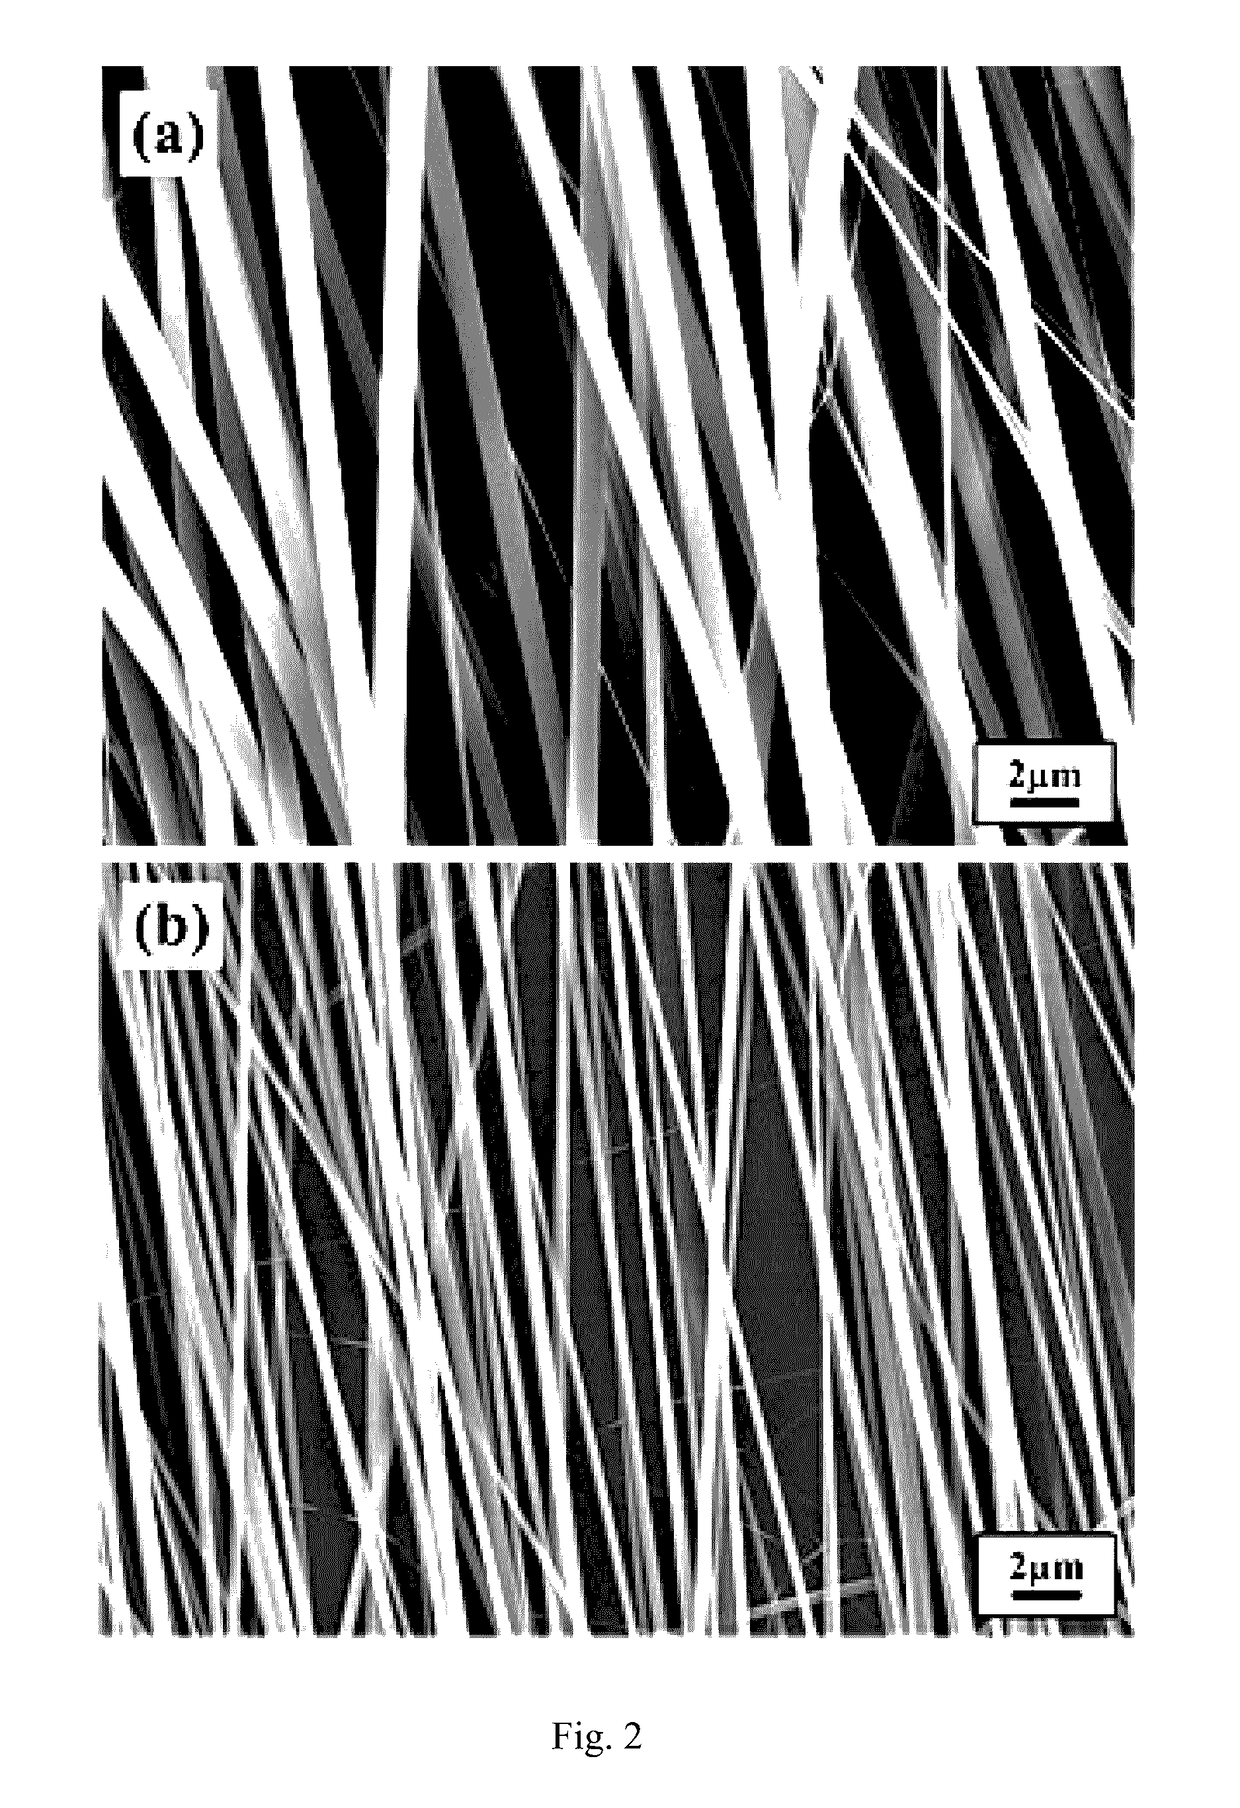 Nanofiber and photovoltaic device comprising patterned nanofiber